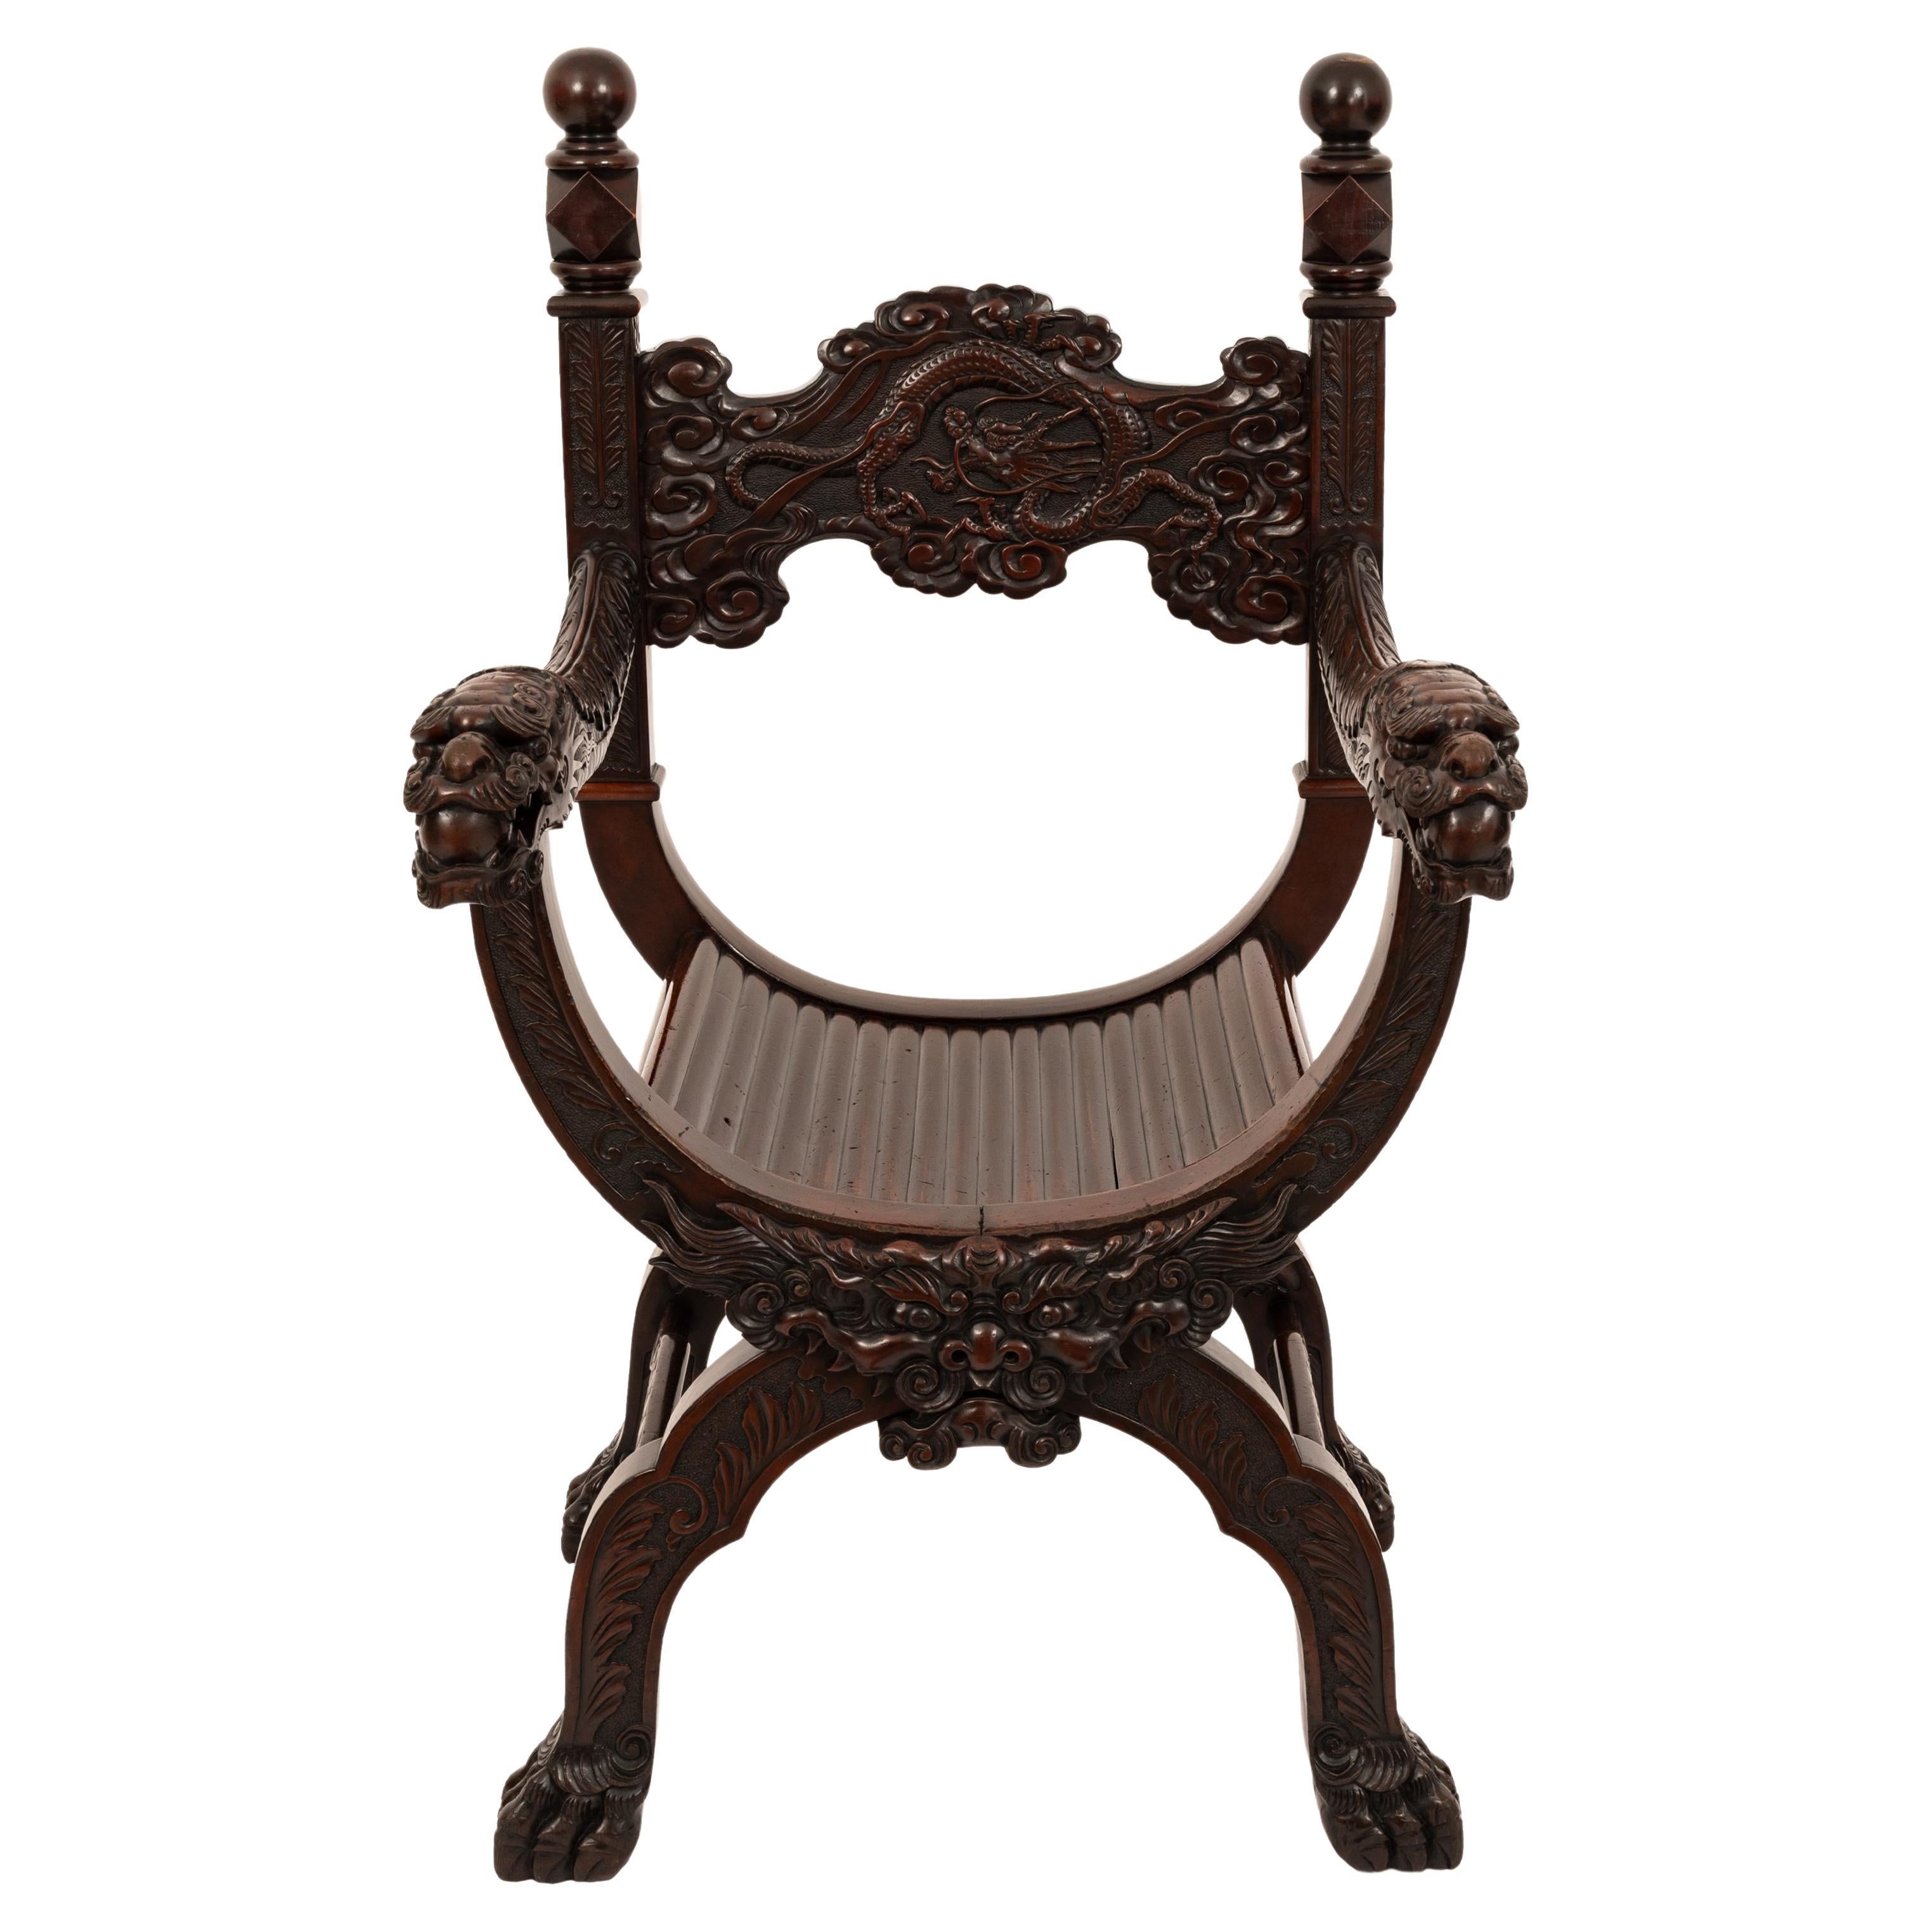 A very rare antique American carved Savanarola dragon chair, by Robert Mitchell, circa 1900.
This most unusual chair by Robert Mitchell (formerly Mitchell and Rammelsberg) follows a Savanarola form of the 15th Century chairs of the Italian